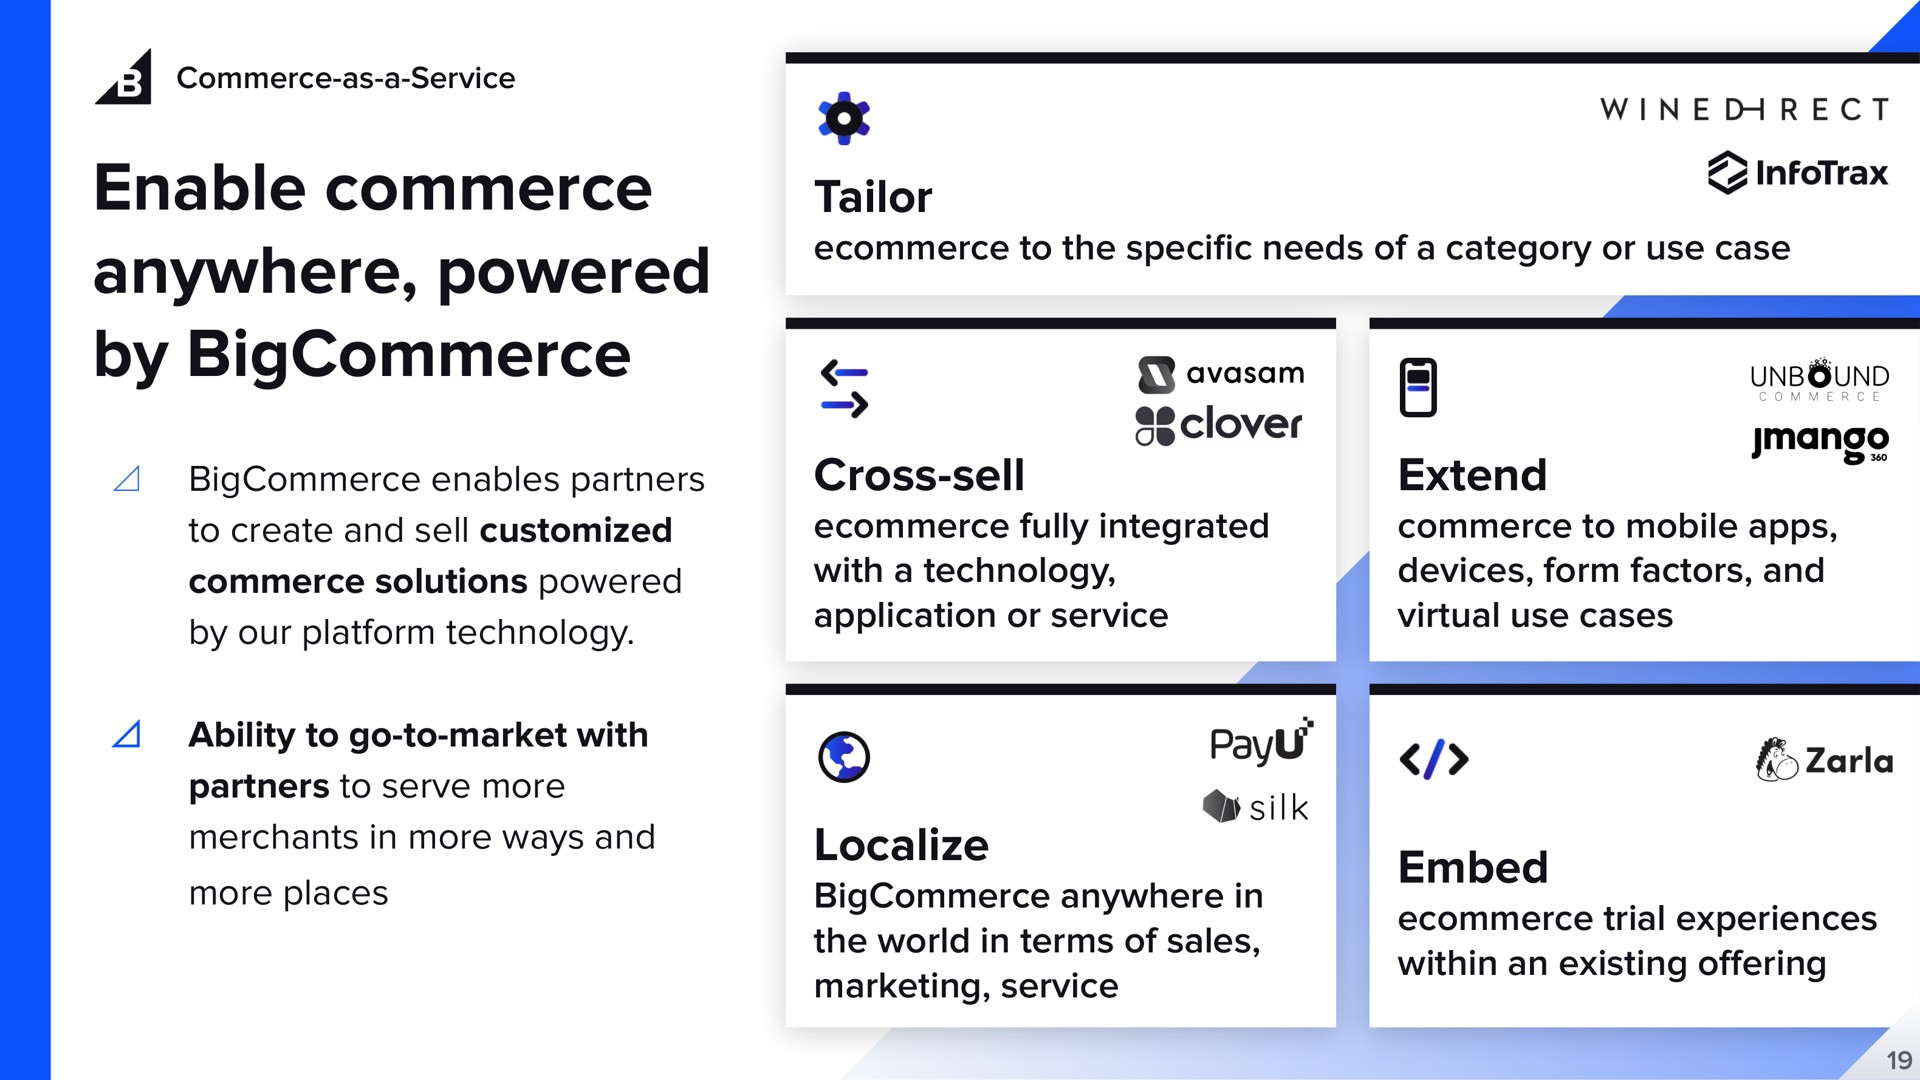 enable commerce anywhere powered by tailor cross sell extend localize embed clover a enables partners a ability to go to market with more places i in trial experiences | BigCommerce